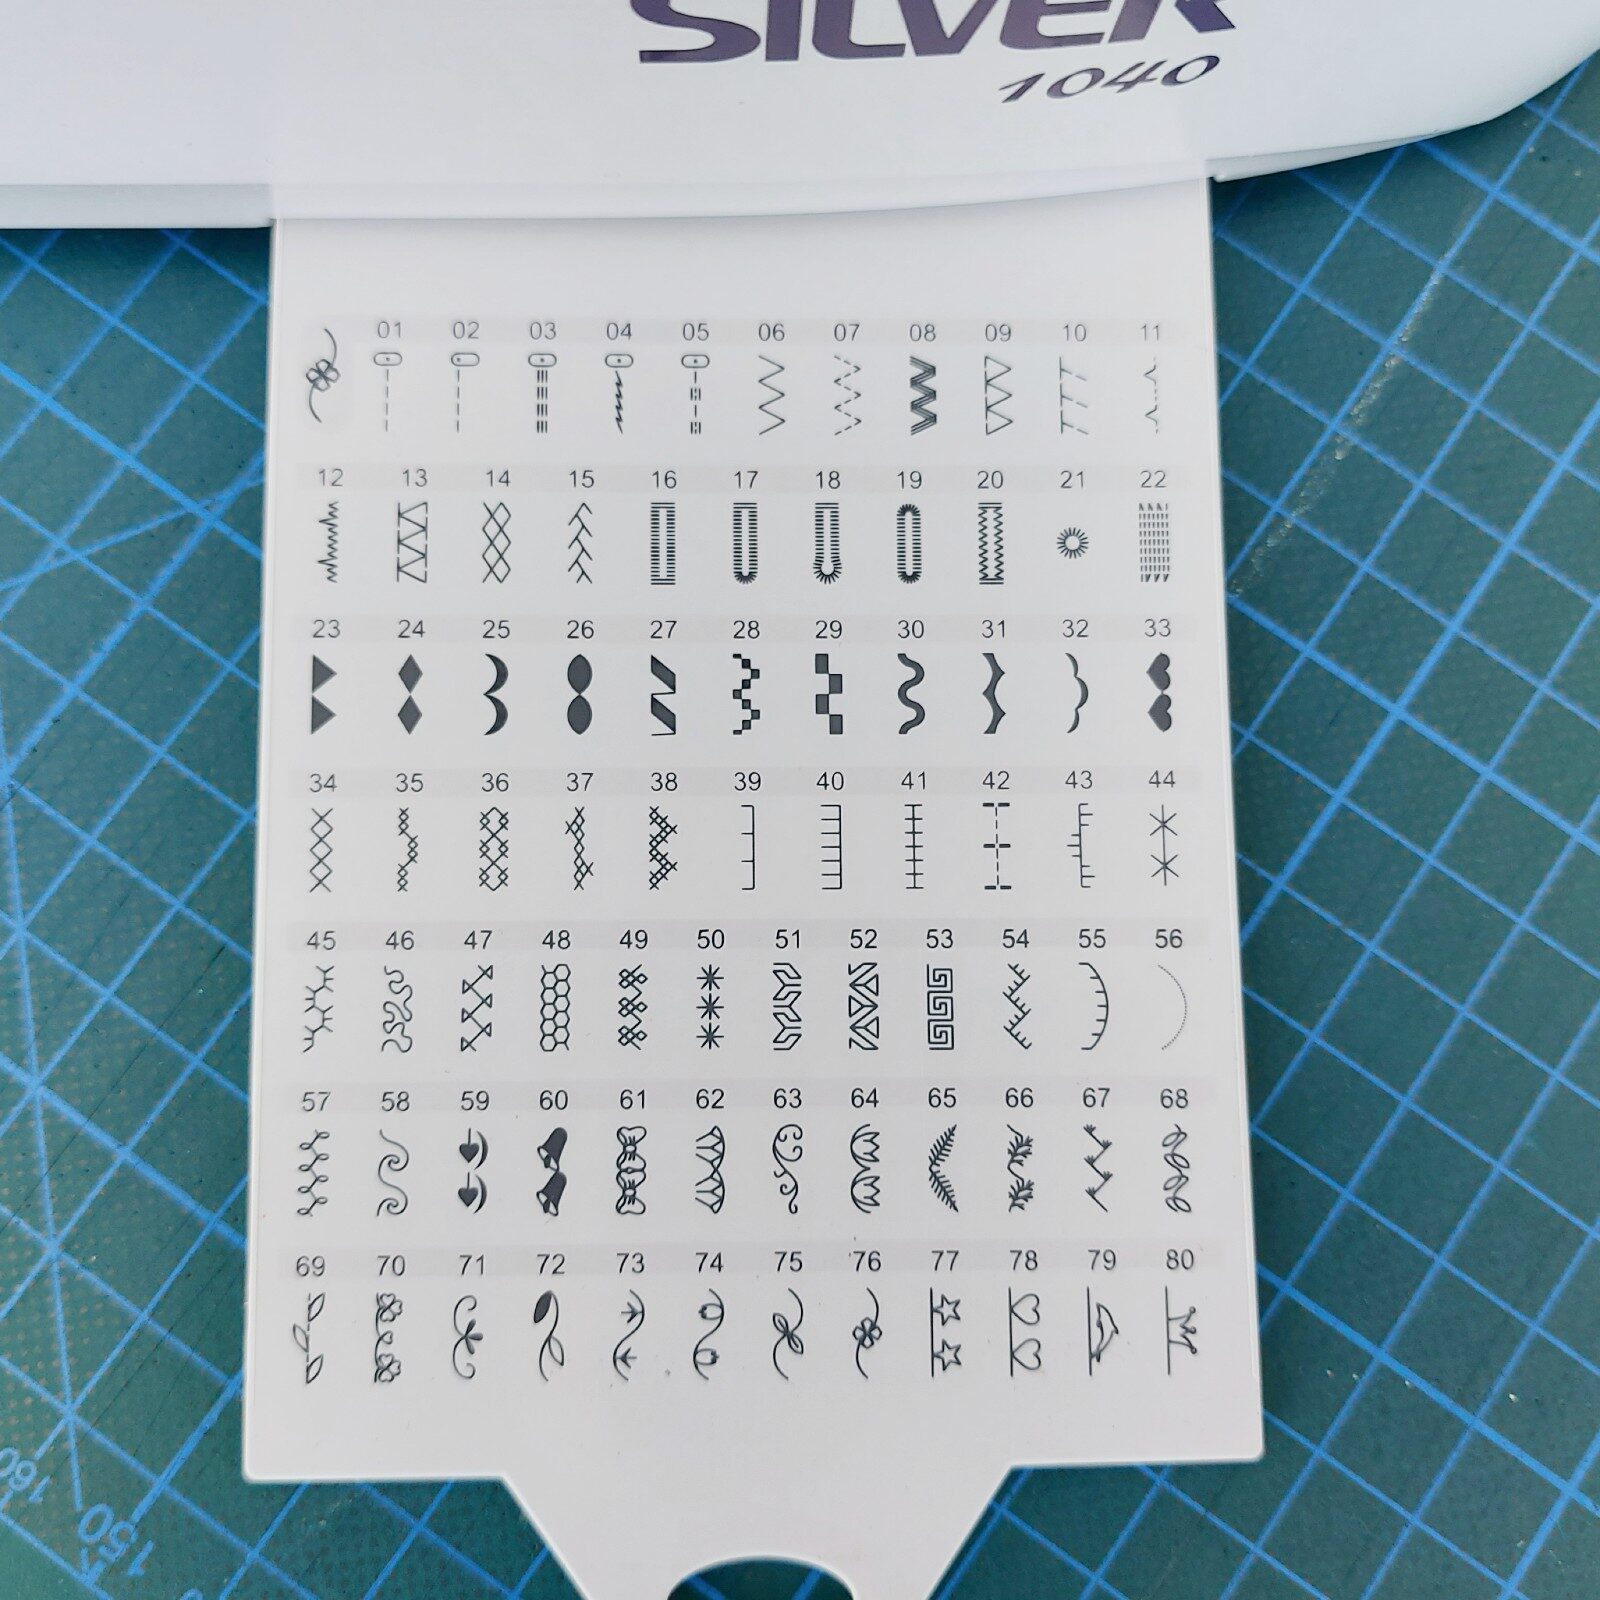 Stitch selection for the Silver 1040 Sewing Machine | More Sewing 